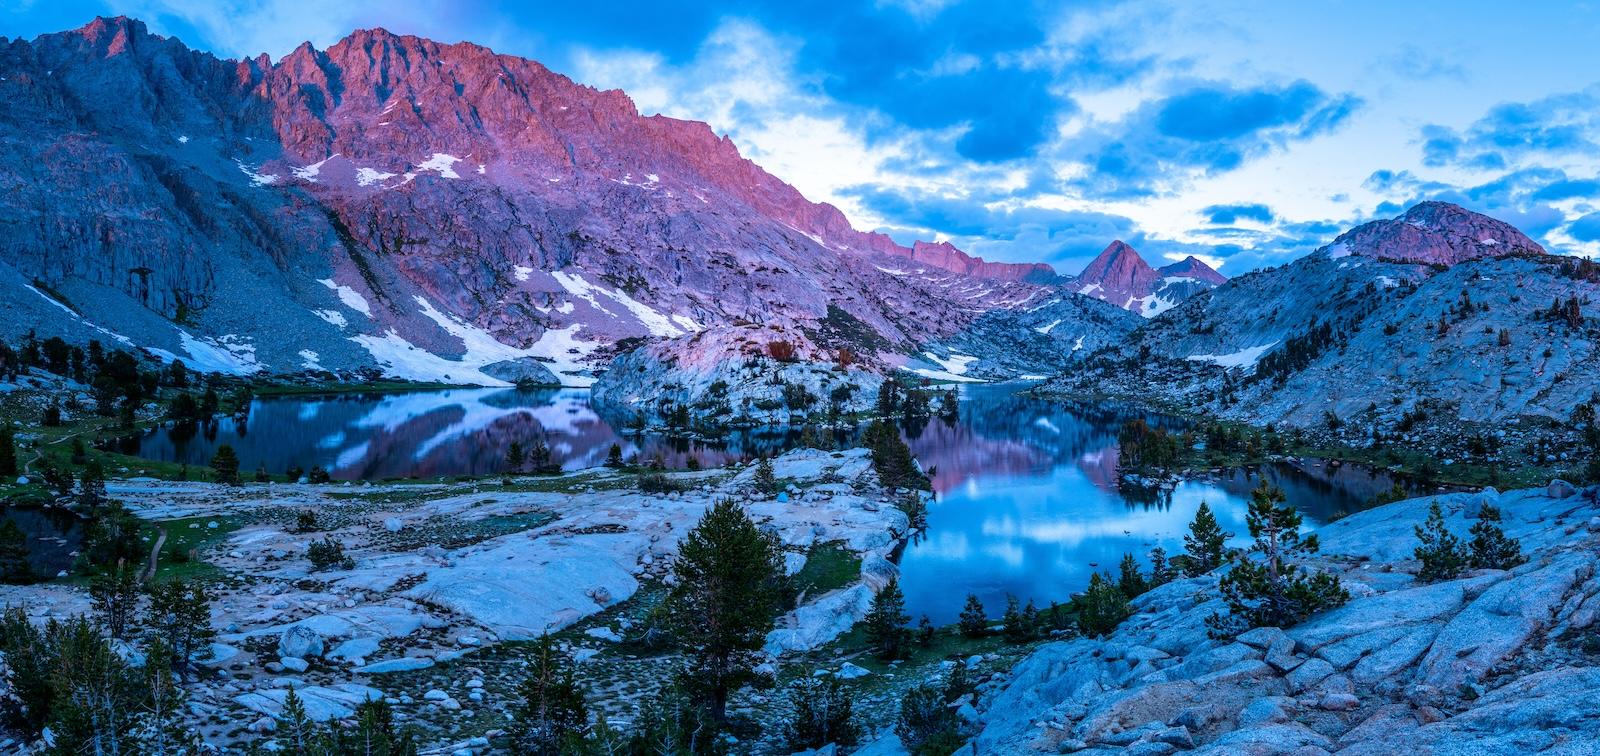 Sunset at Evolution Lake in Kings Canyon National Park